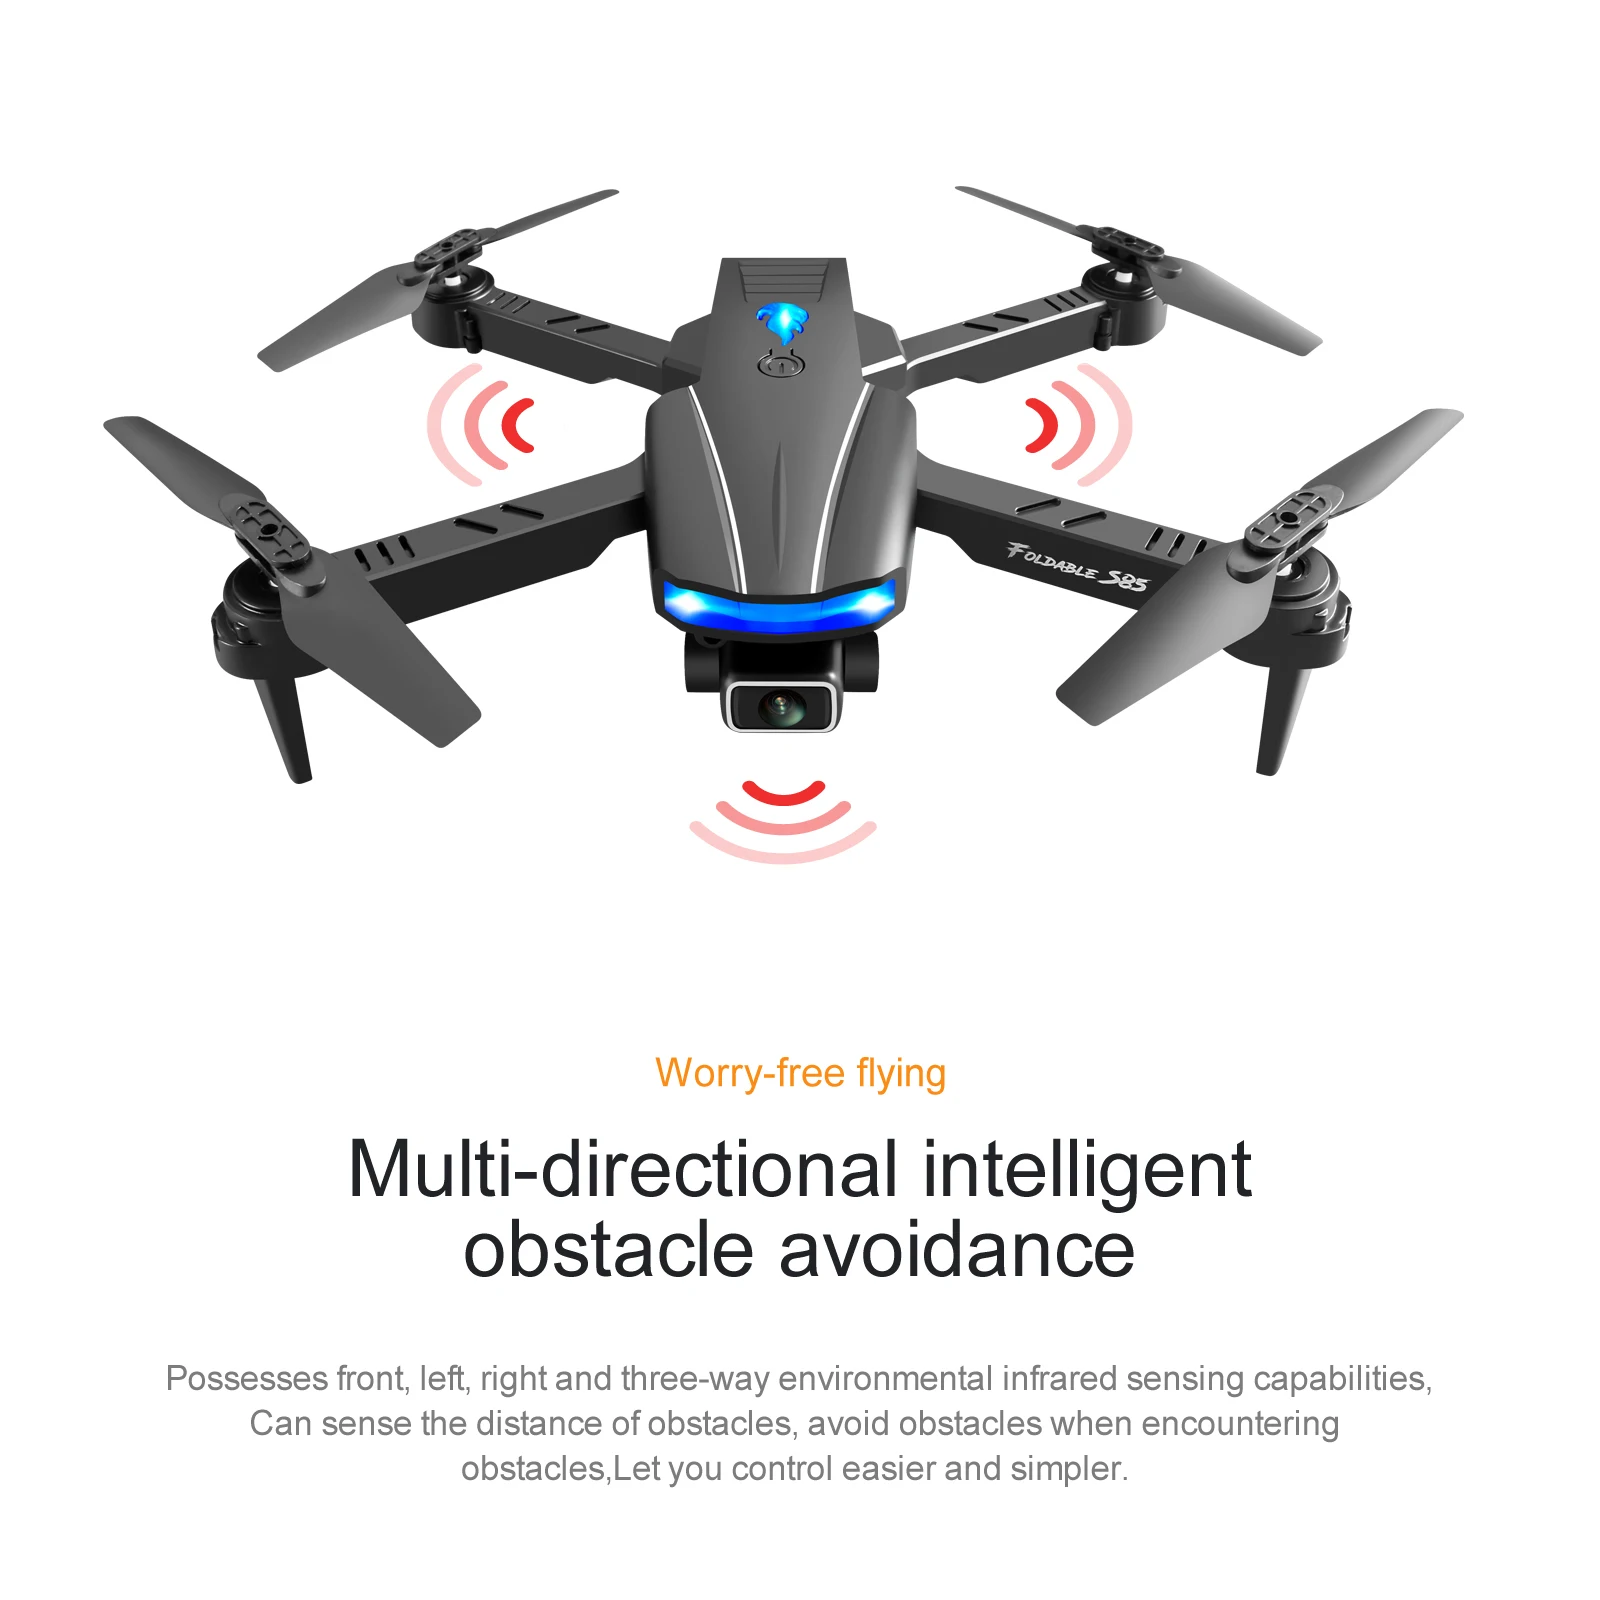 outdoor rc helicopter S85 Pro Quadcopter 4K HD Dual Camera Wifi FPV Drones With Infrared Obstacle Avoidance Rc Helicopter Quadcopter Mini Drone Toys remote control helicopter